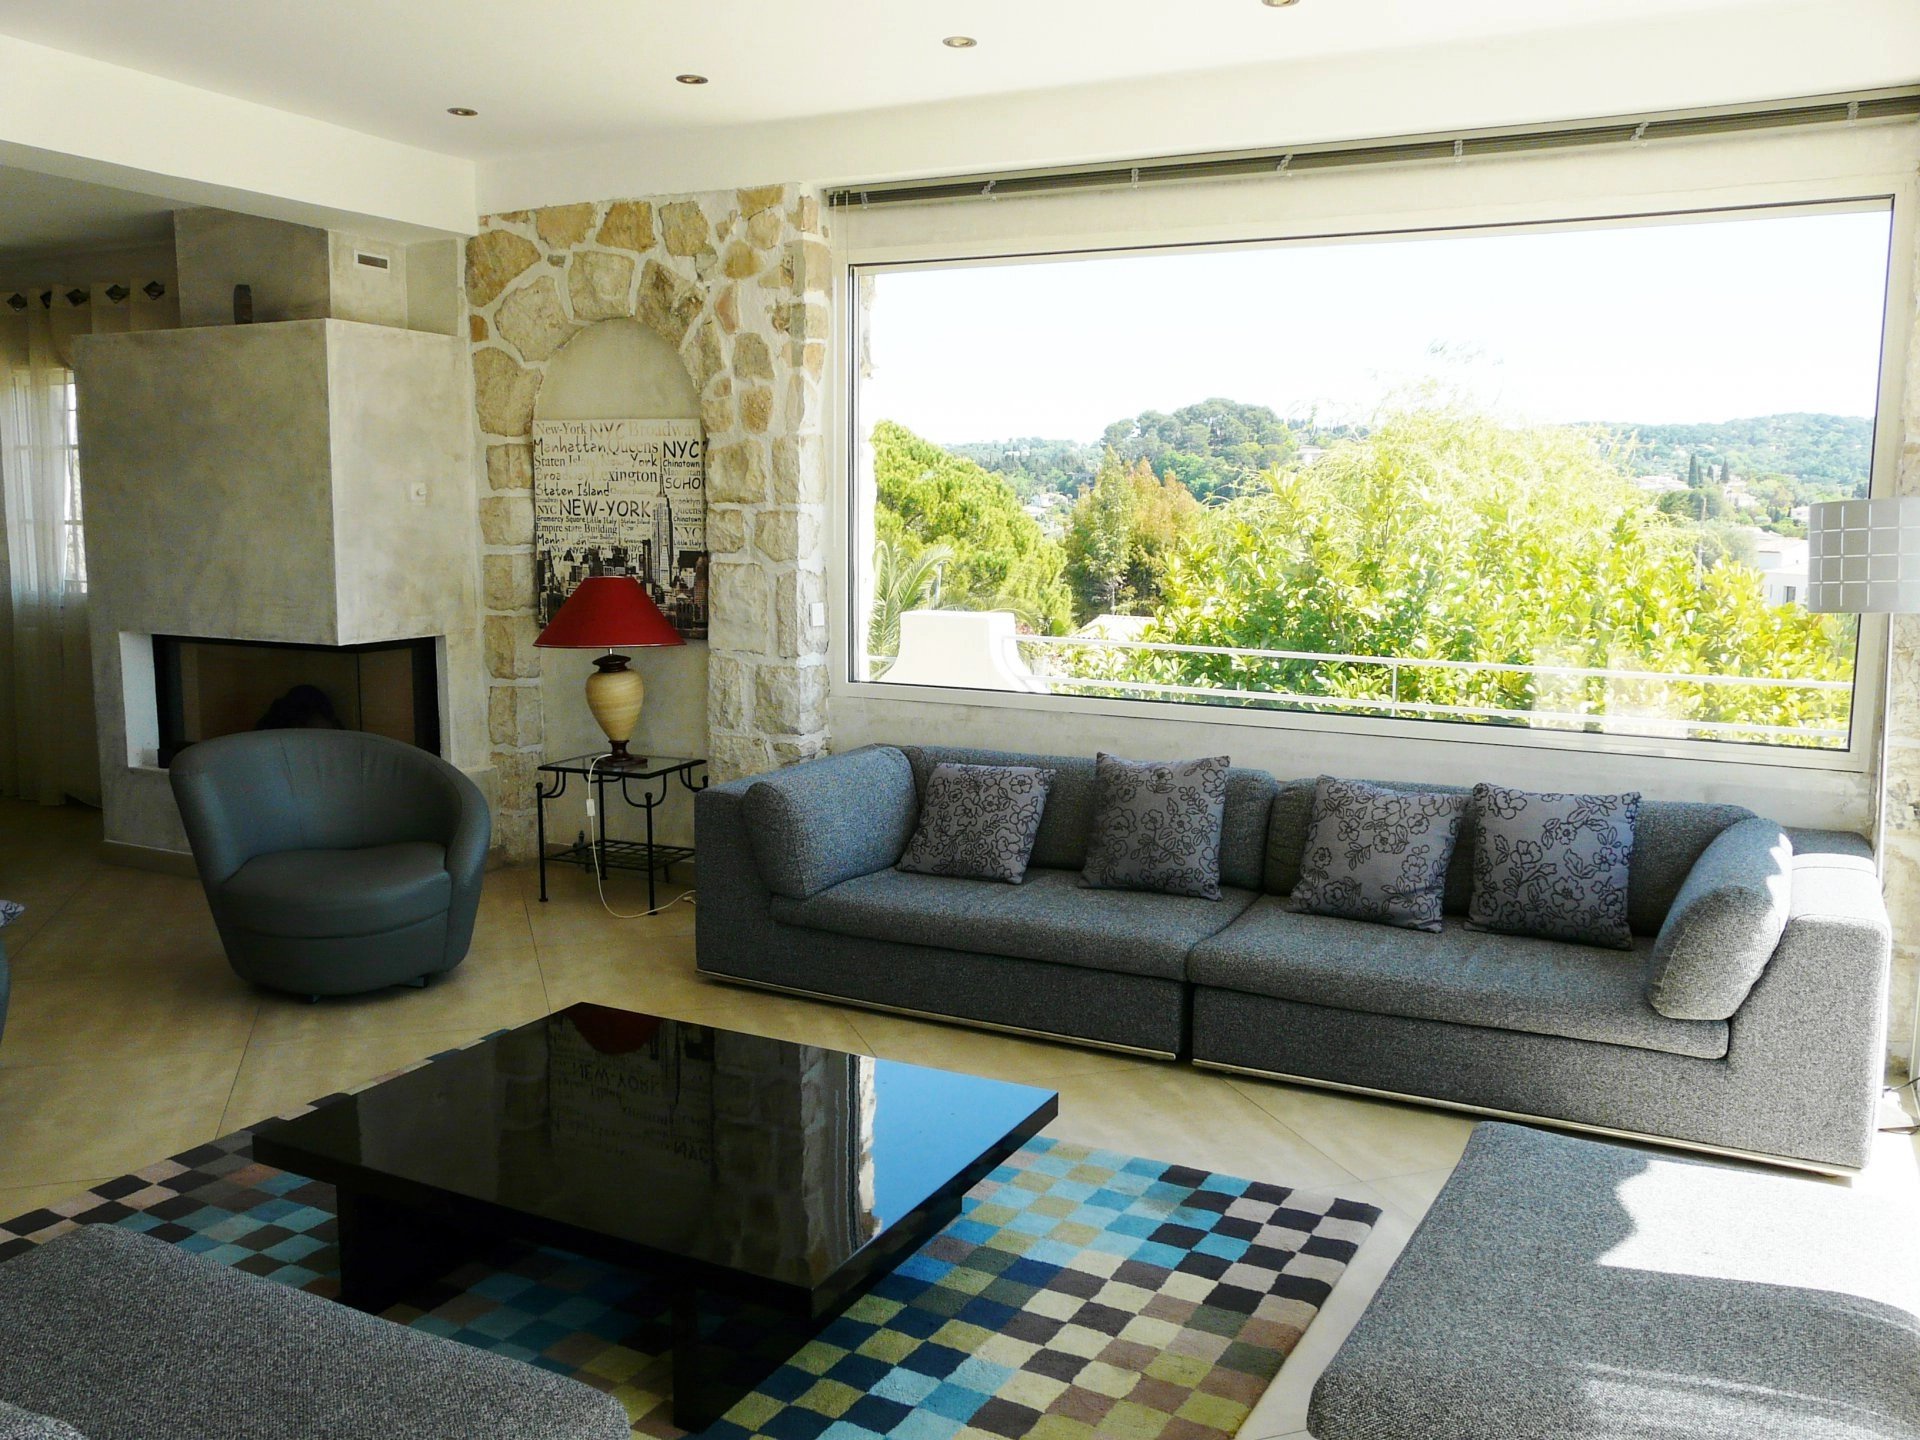 BEAUTIFUL AND COMFORTABLE VILLA IN A VERY QUIET AREA